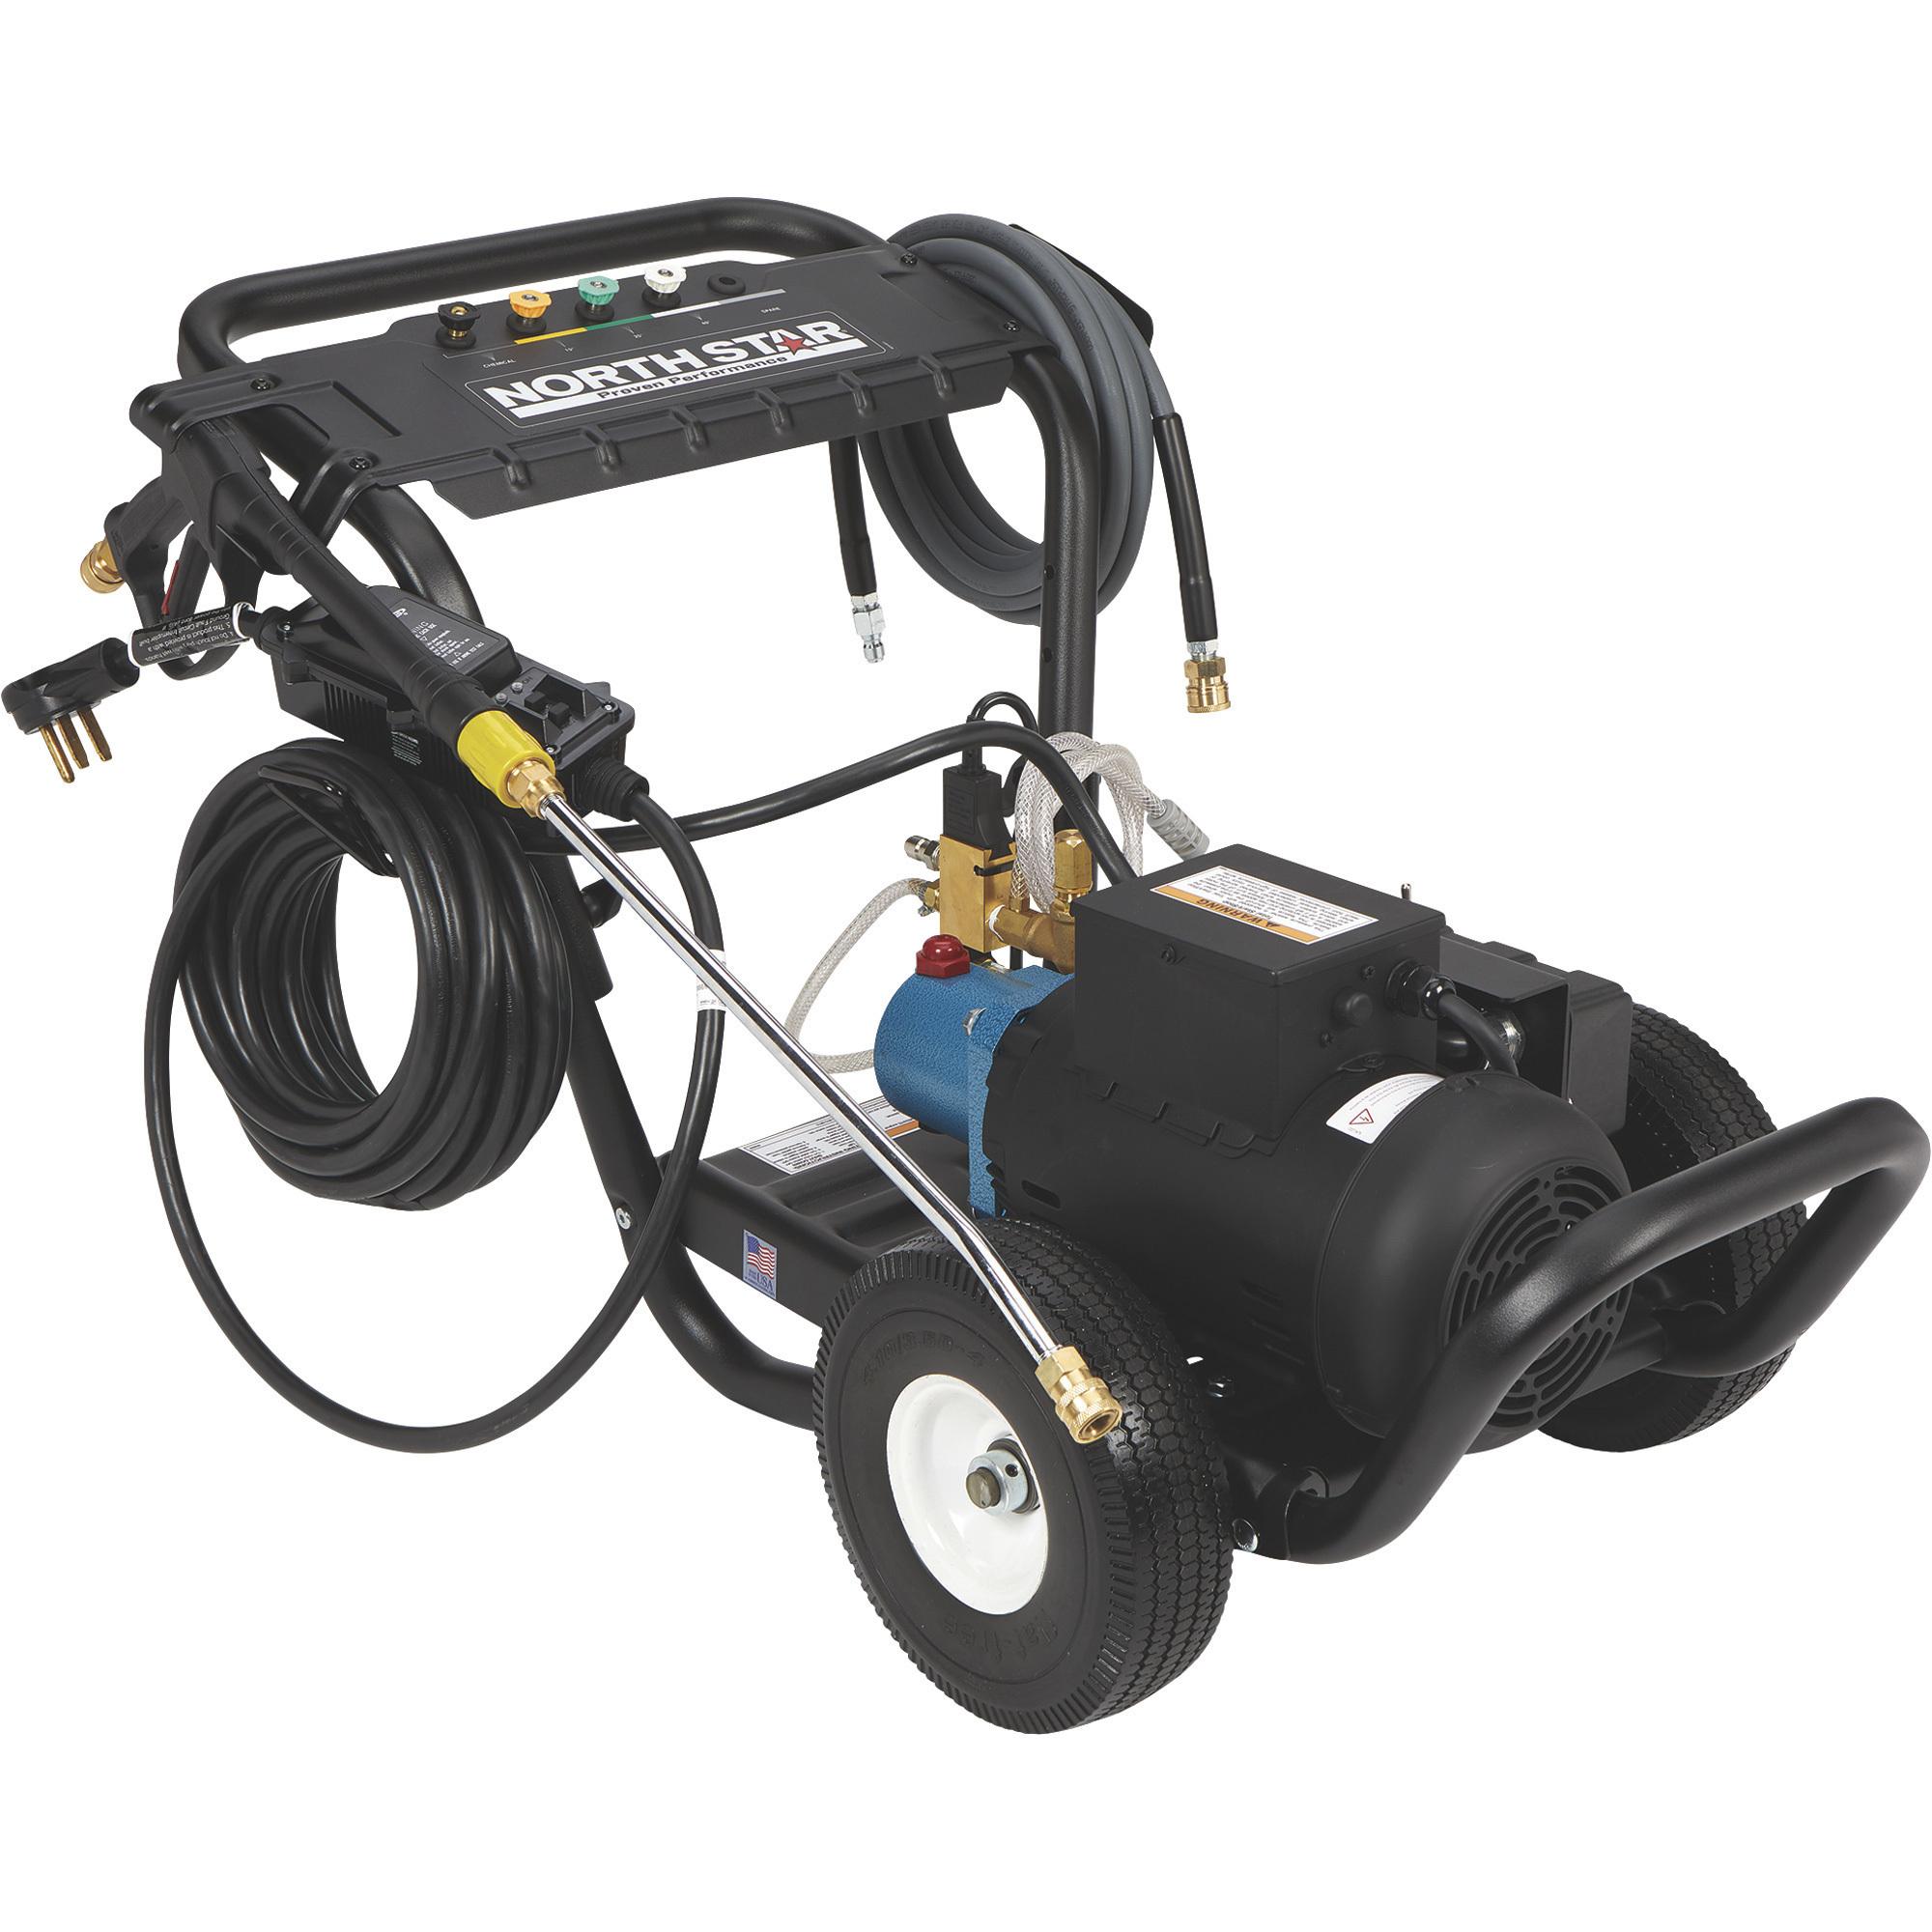 NorthStar 3000 PSI, 2.5 GPM Electric Cold Water Pressure Washer â 230 Volts